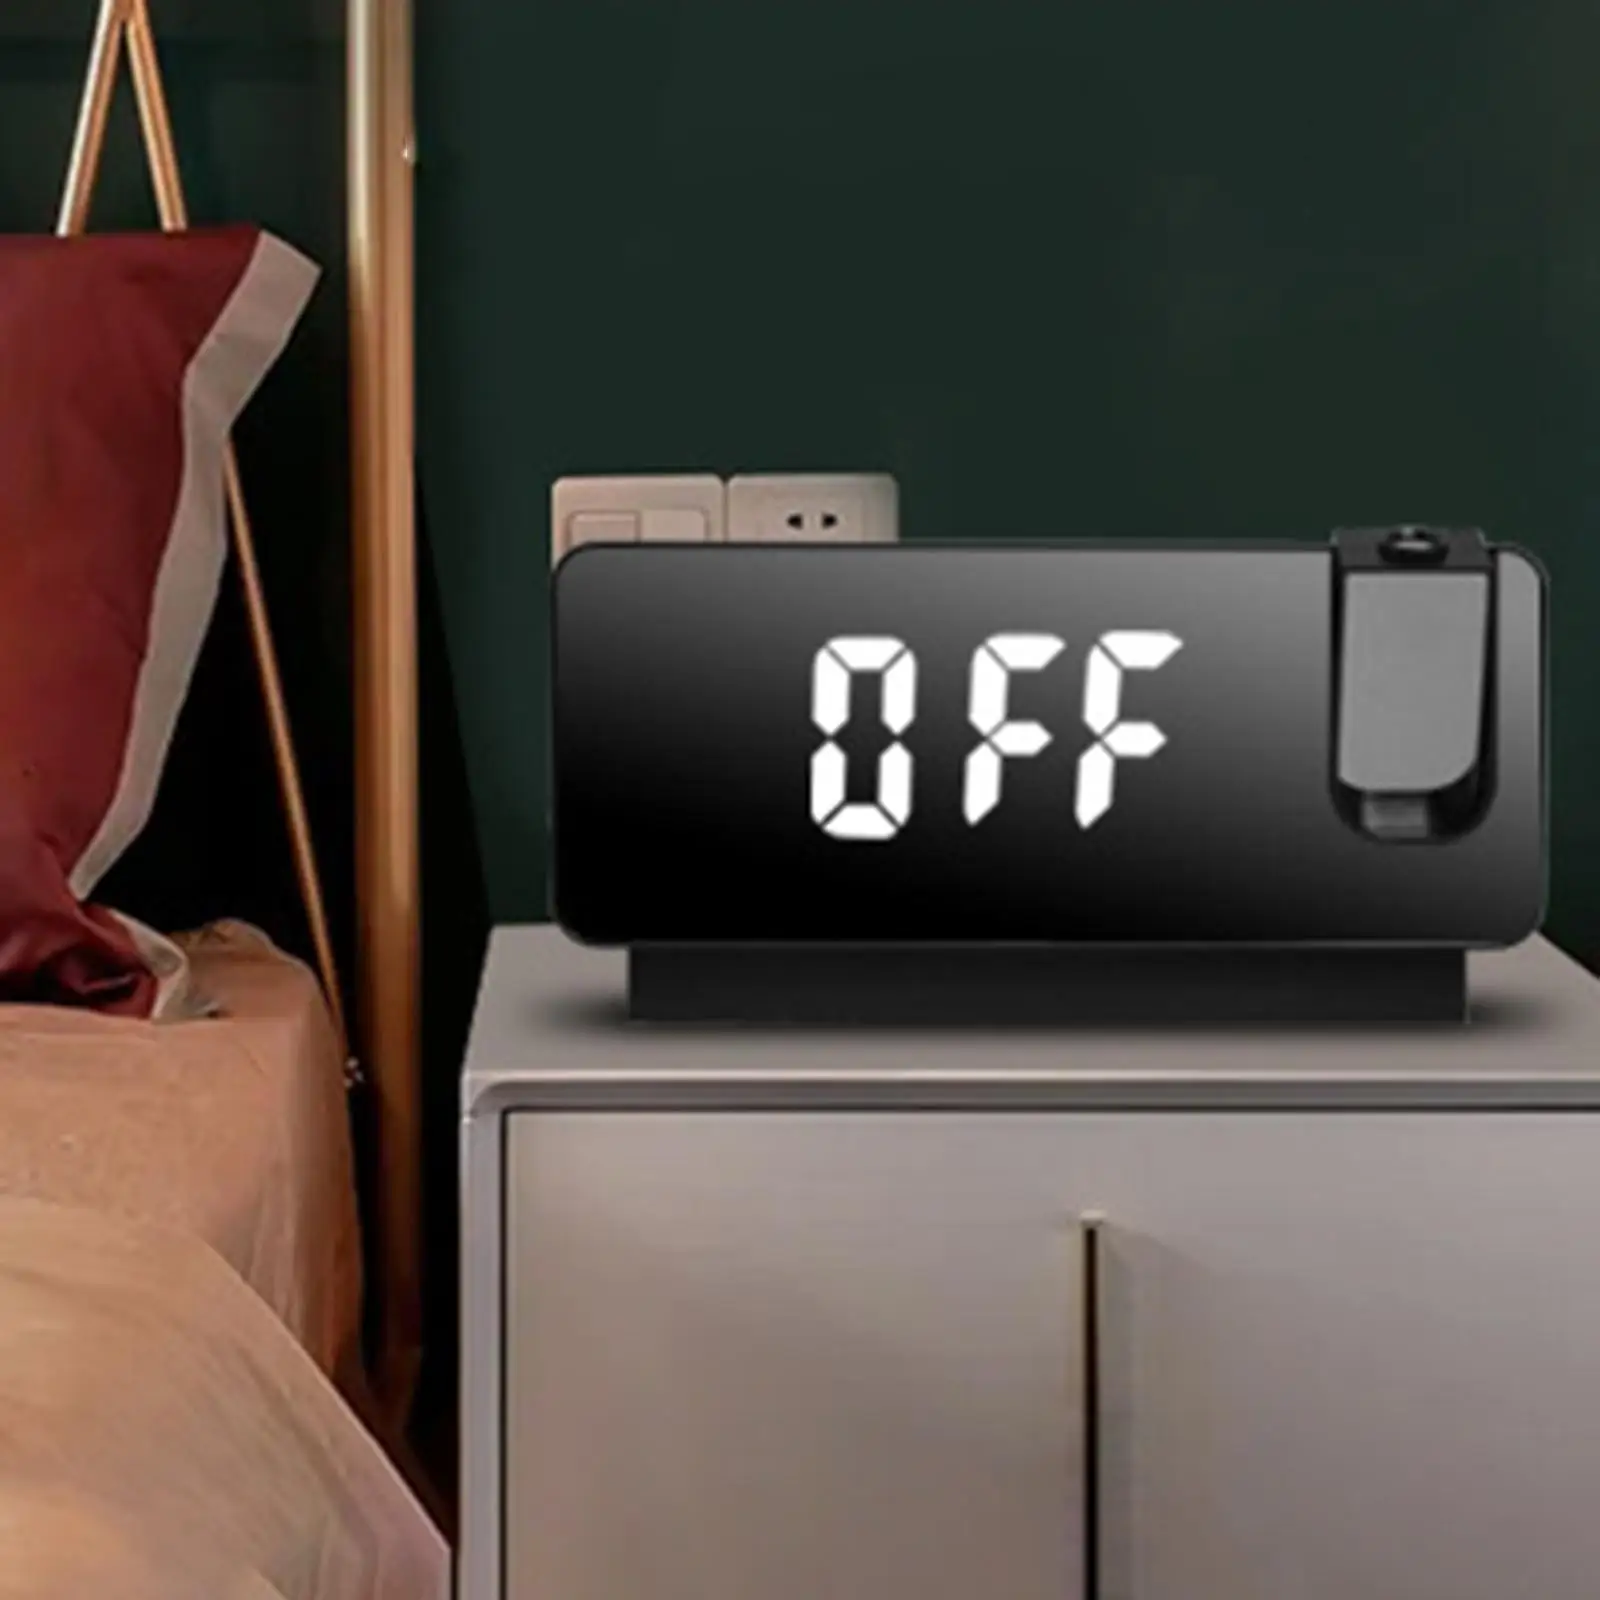 Projector Alarm Clock Mirror Surface Silent 180 Rotatable Snooze Function